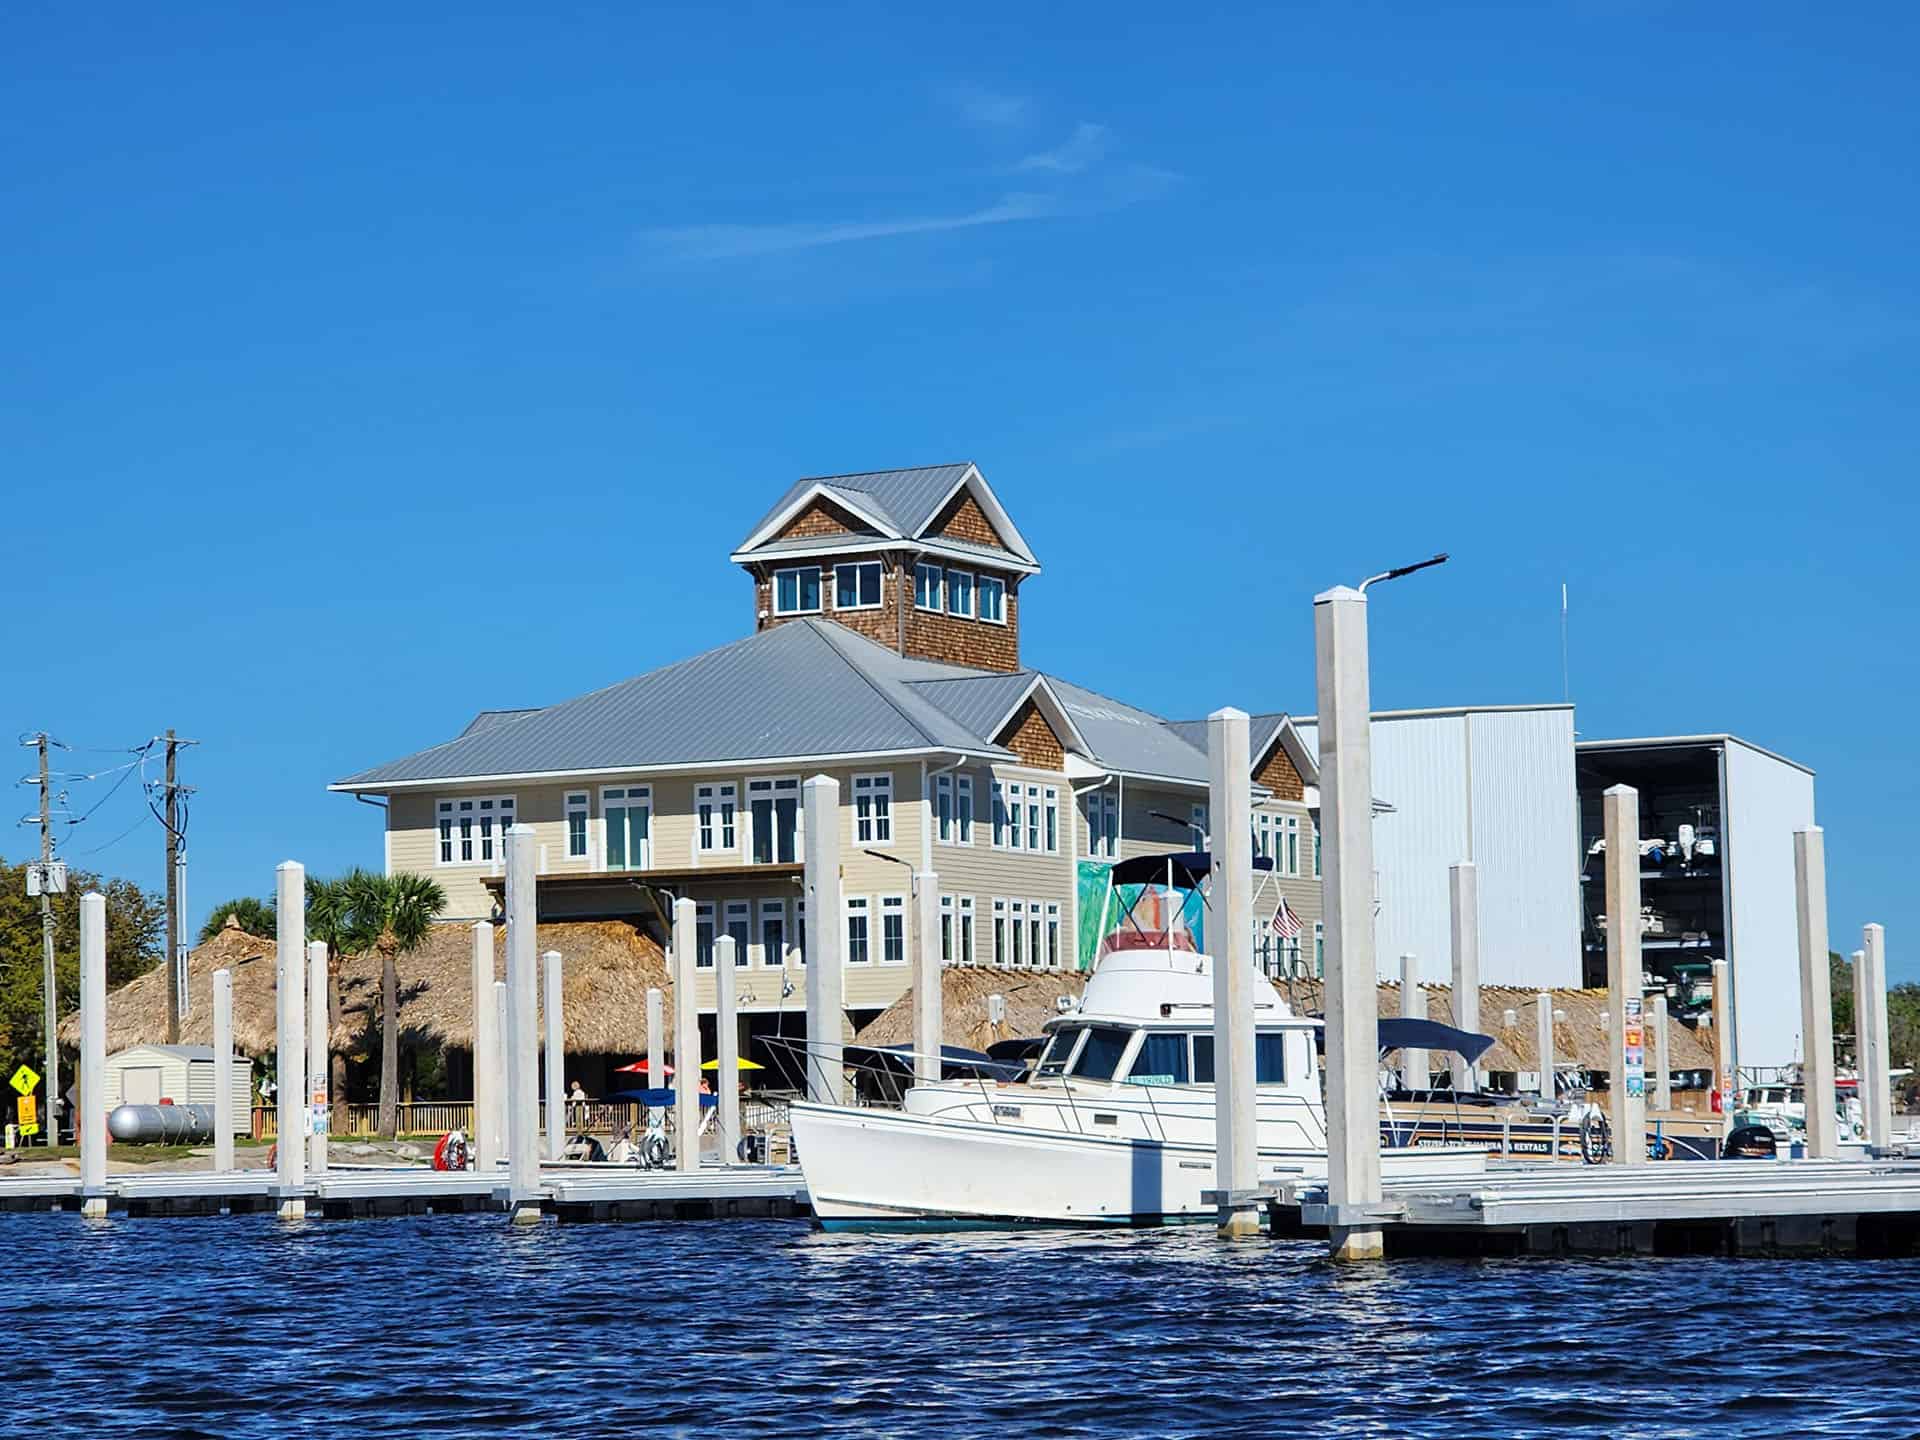 A view of Steinhatchee Marina from the water